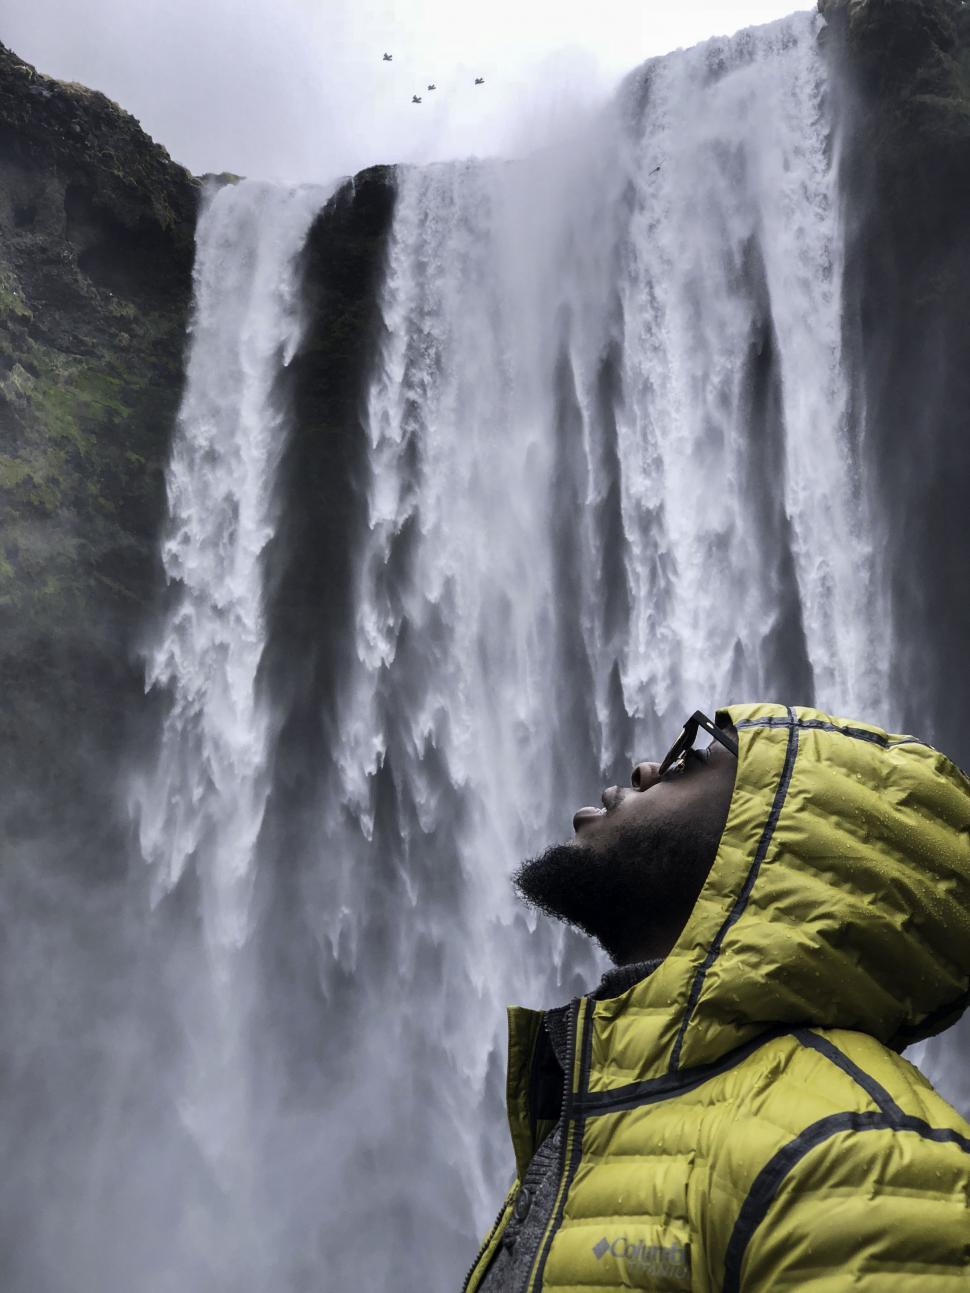 Free Image of Young Man in Winter Jacket With Waterfall 